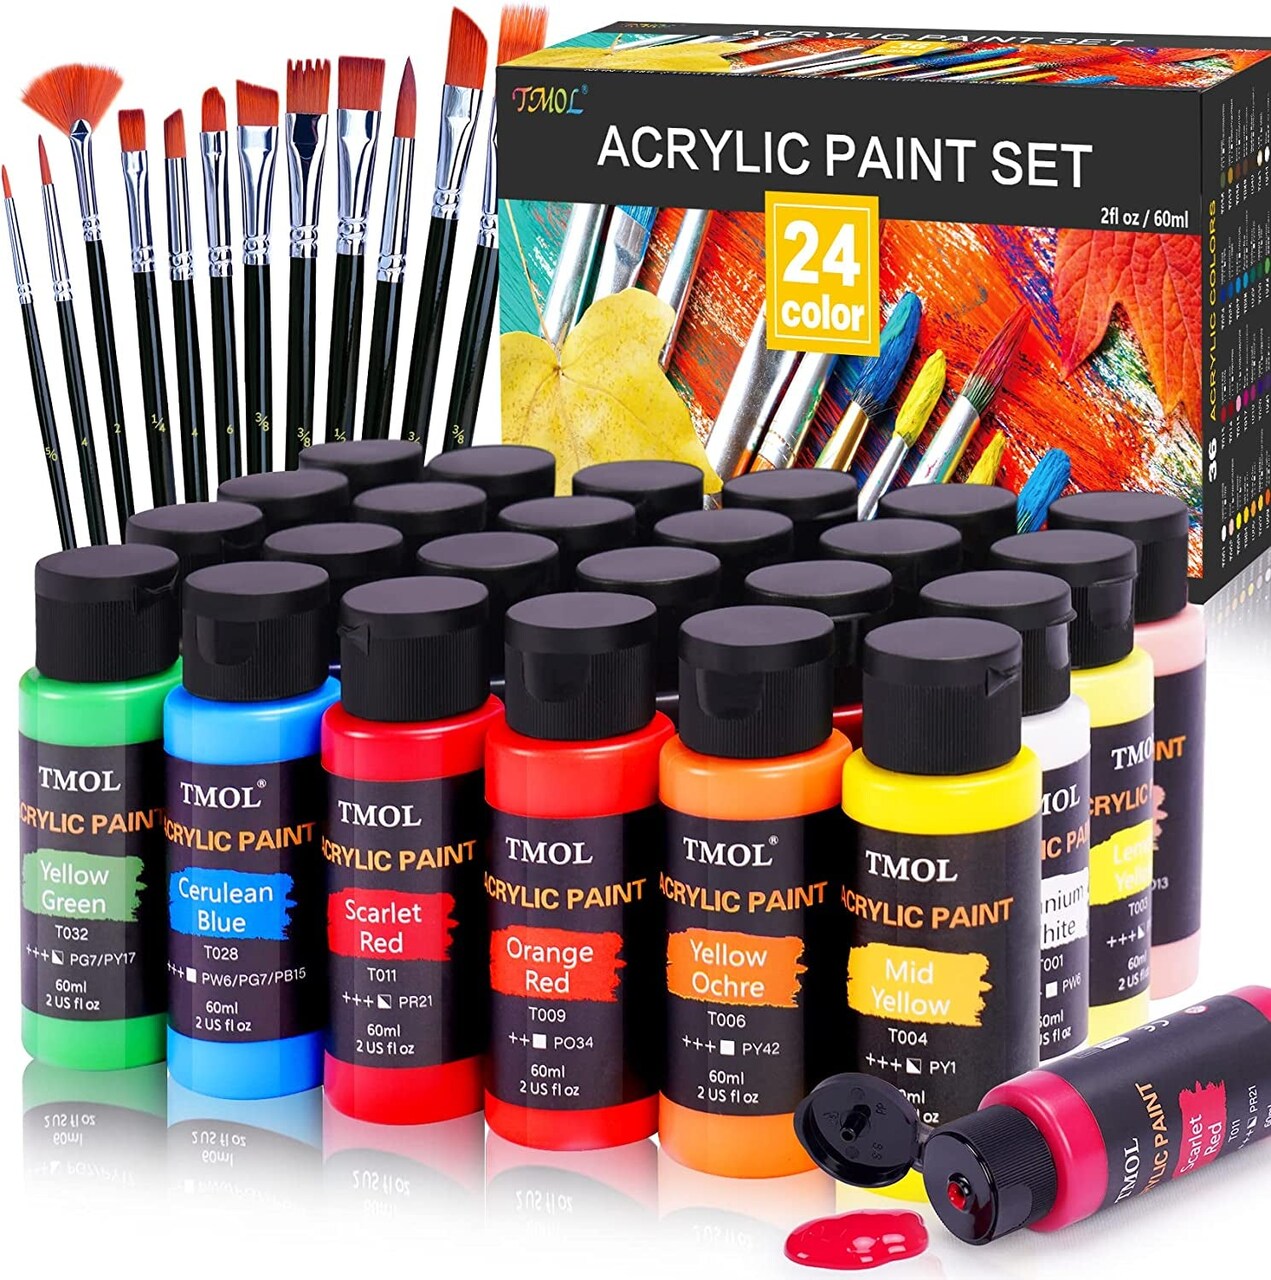 Acrylic Paint Set with 12 Art Brushes, 24 Colors (2 Oz/Bottle) Acrylic Paint for Painting Canvas, Wood, Ceramic and Fabric, Paint Set for Beginners, Students and Professional Artist, Rich Pigments